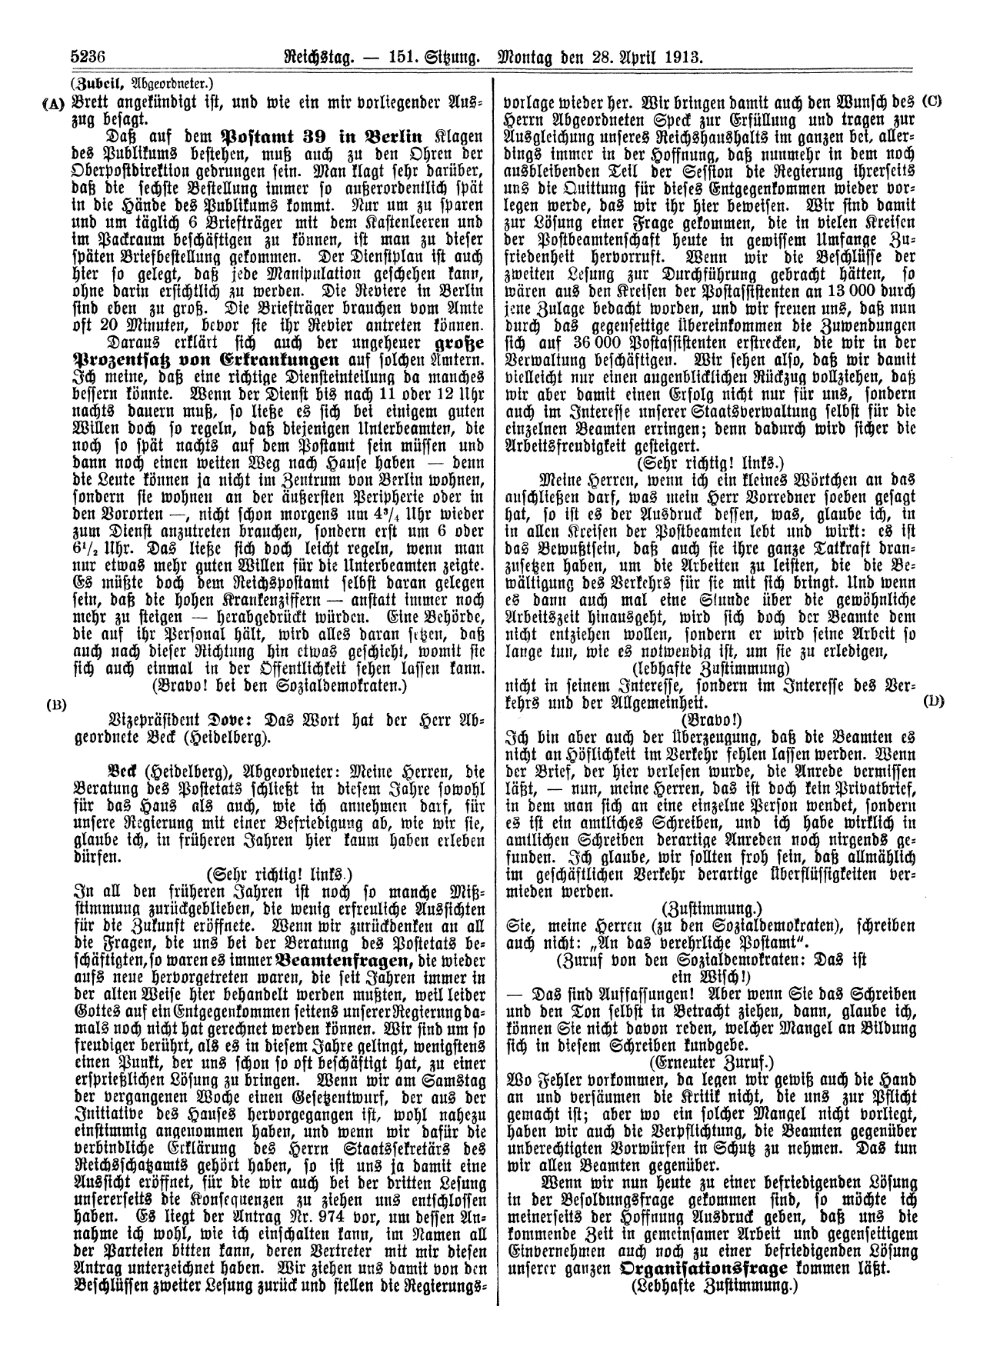 Scan of page 5236